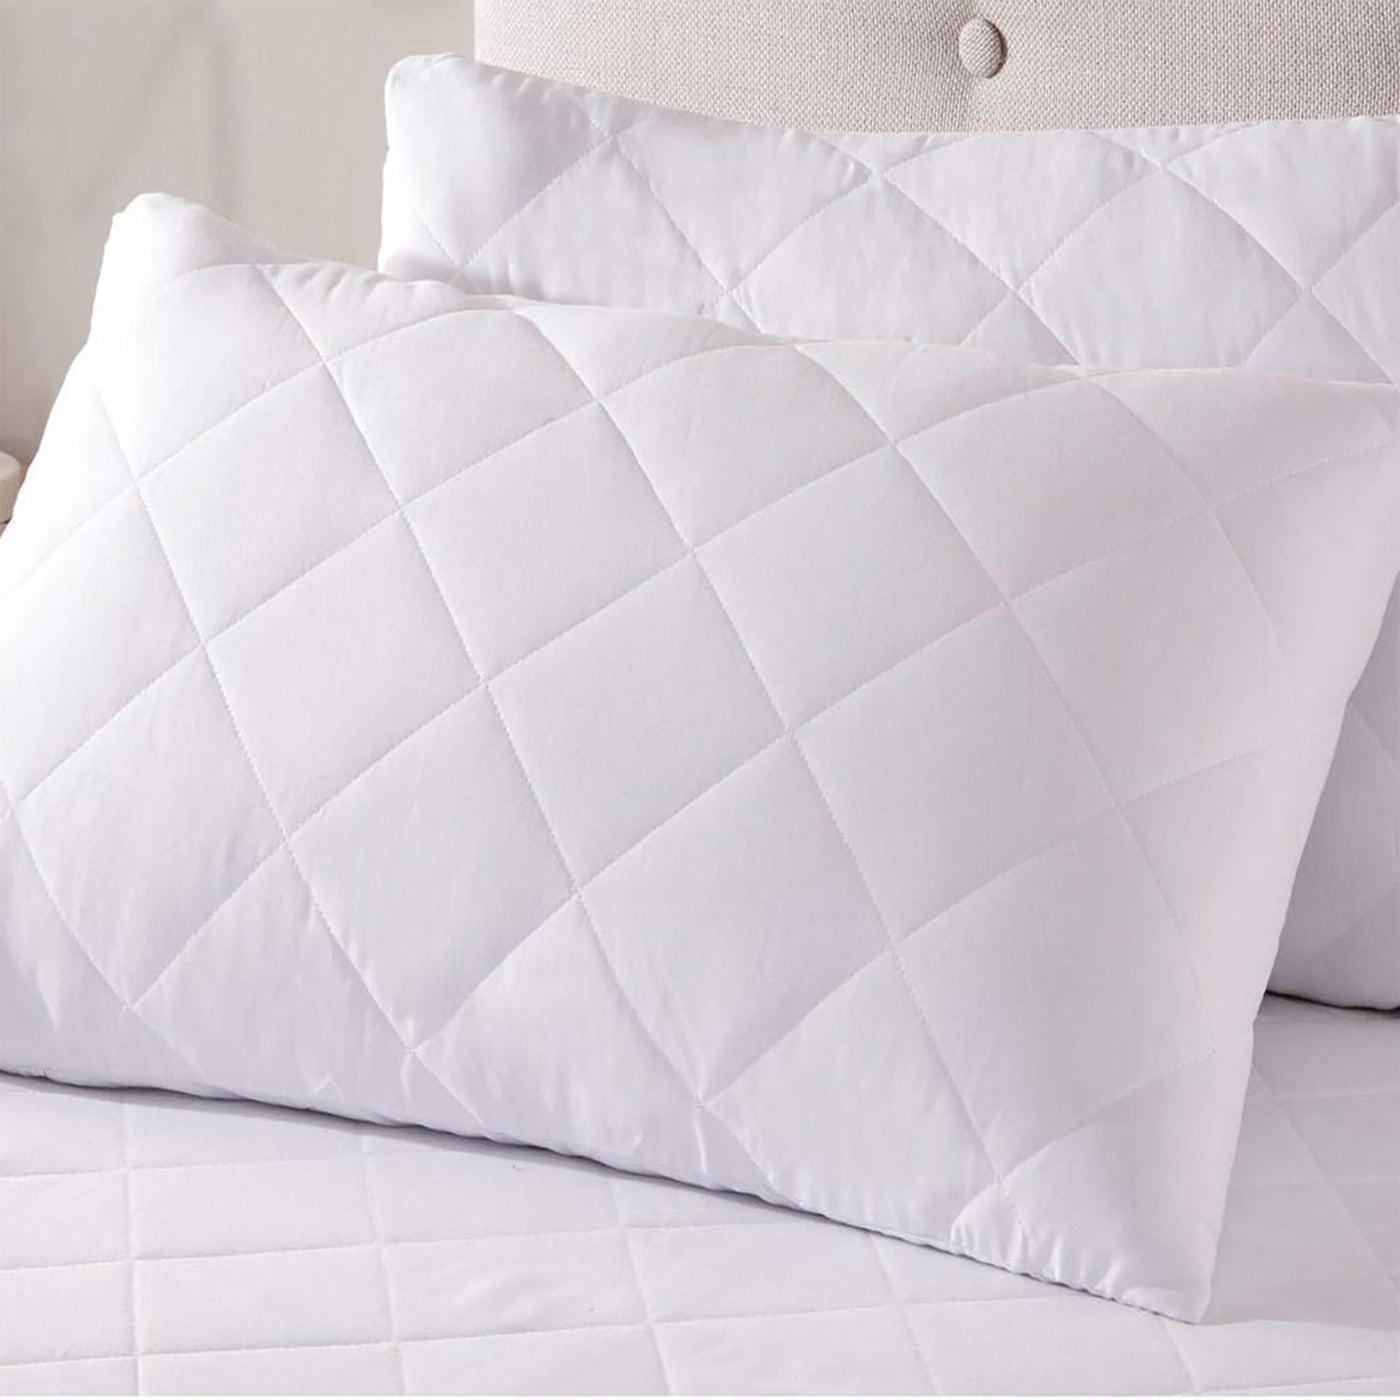 Pillow Protectors Cotton Twin pack